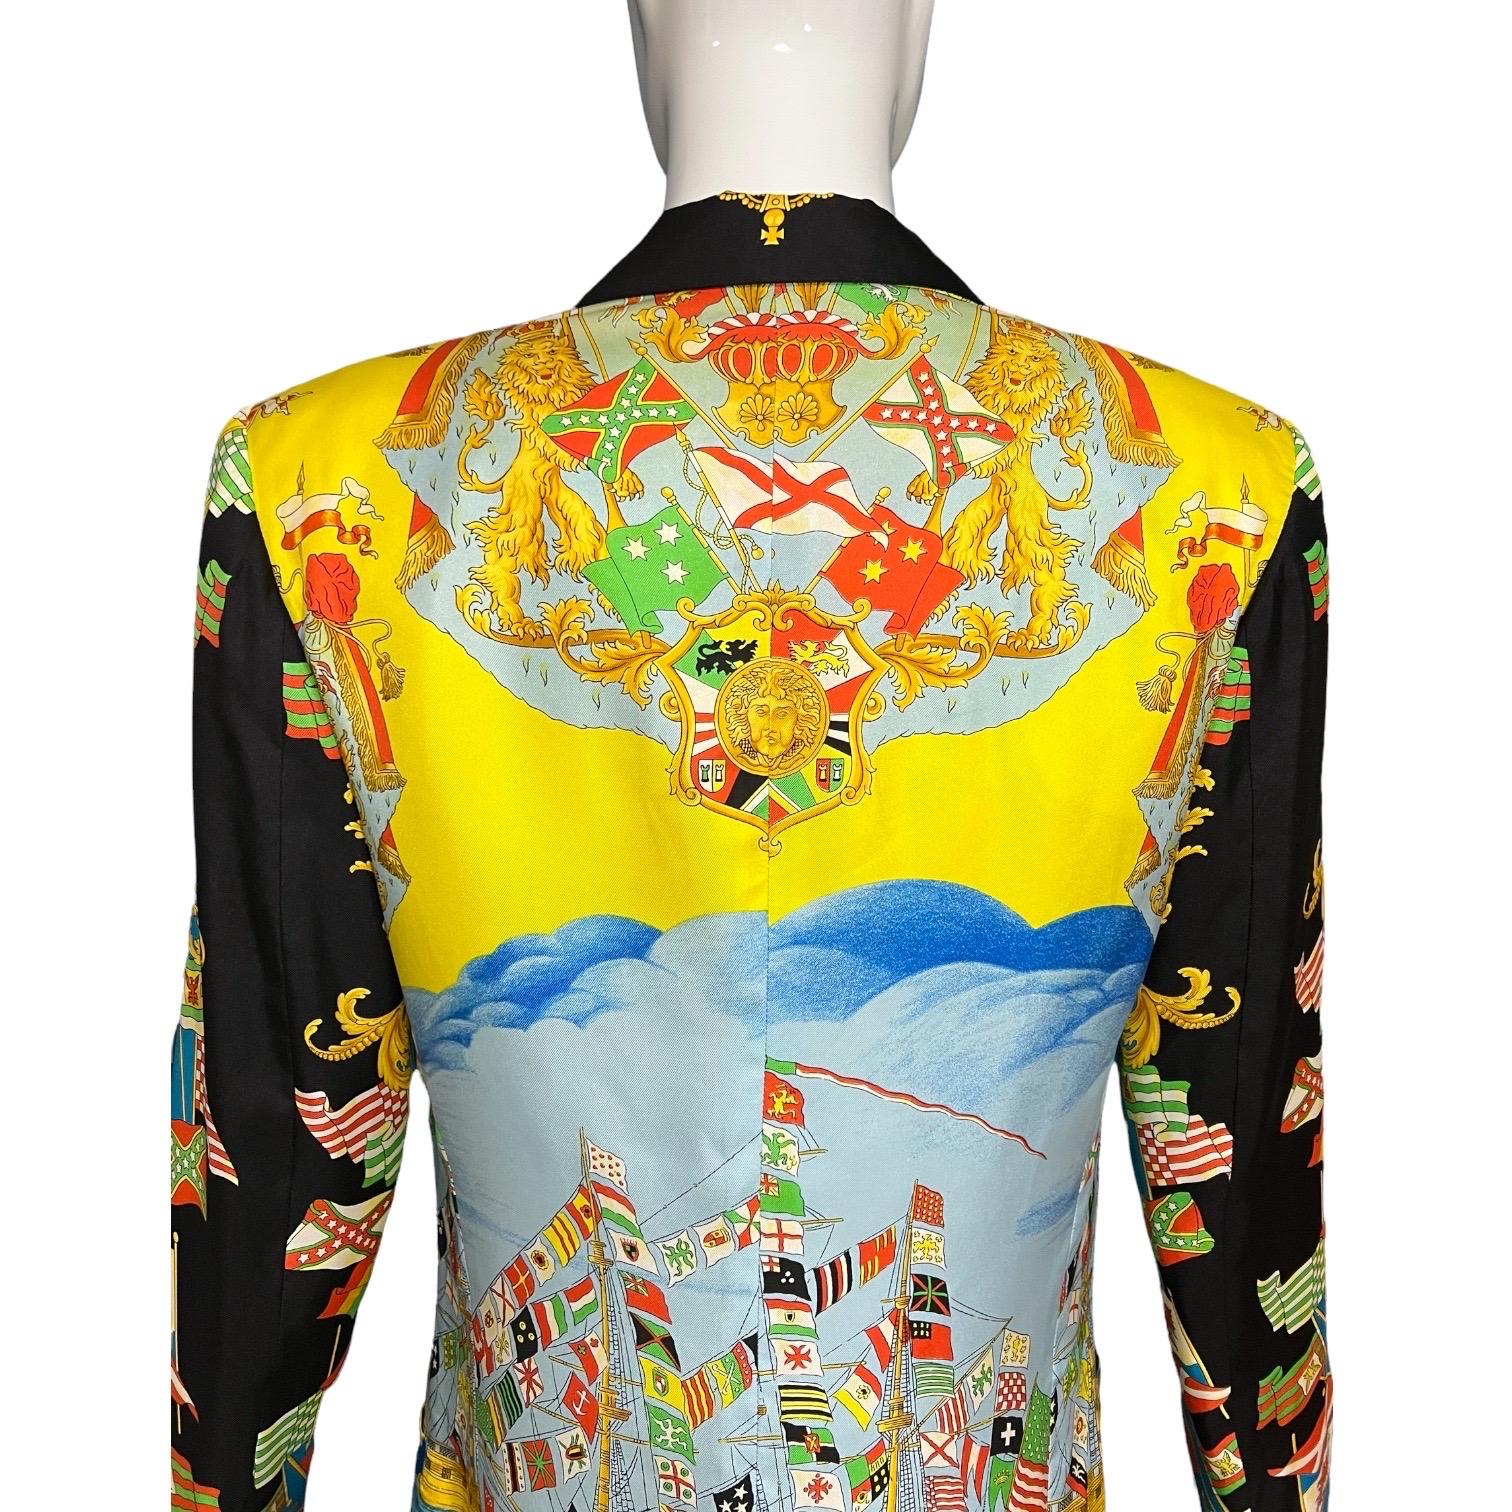 S/S 1993 Gianni Versace Baroque Flags Silk Blazer Jacket Miami Collection  For Sale 5